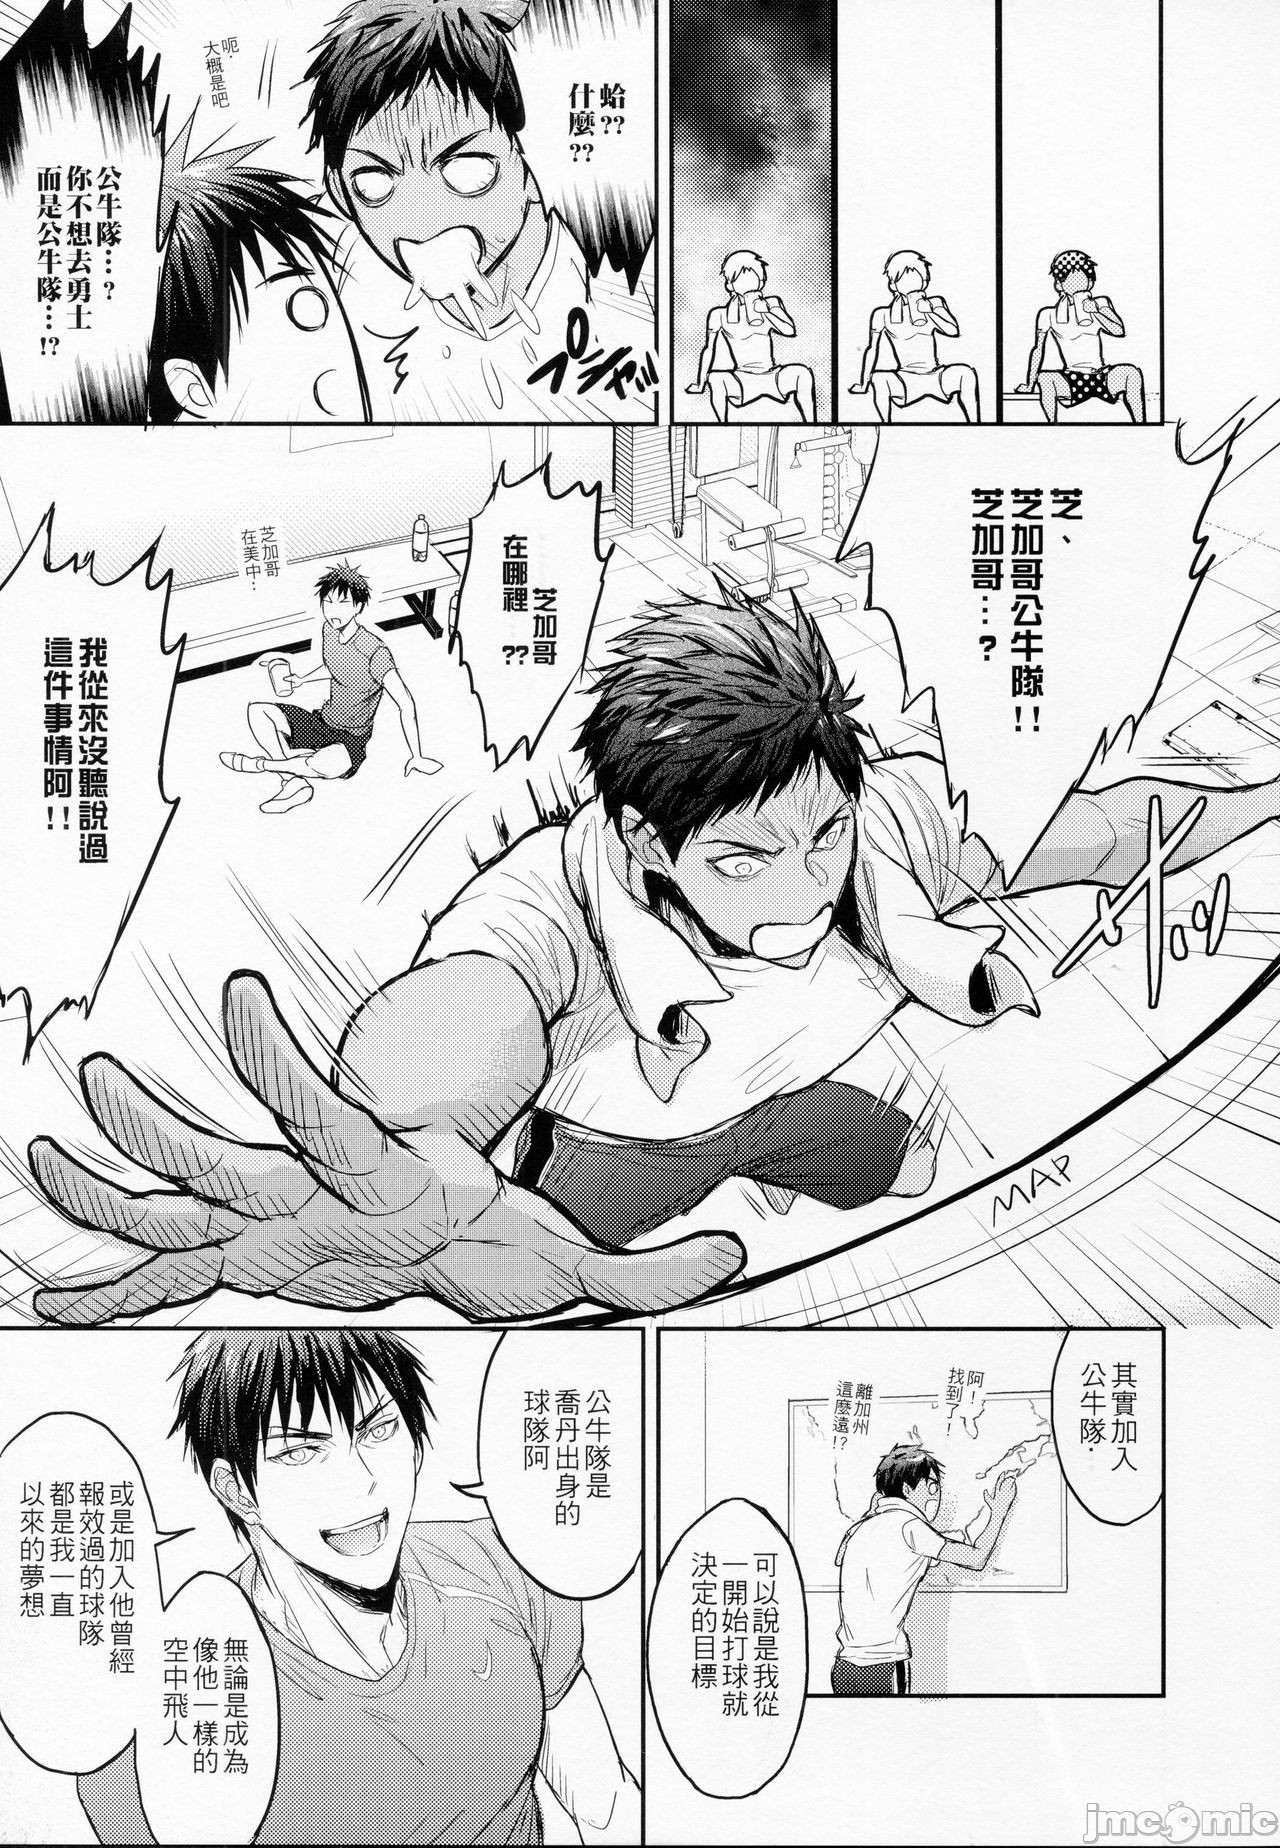 【This is how we WORK IT OUT (黒子のバスケ)[耽美]】漫画-（第1话）章节漫画下拉式图片-8.jpg